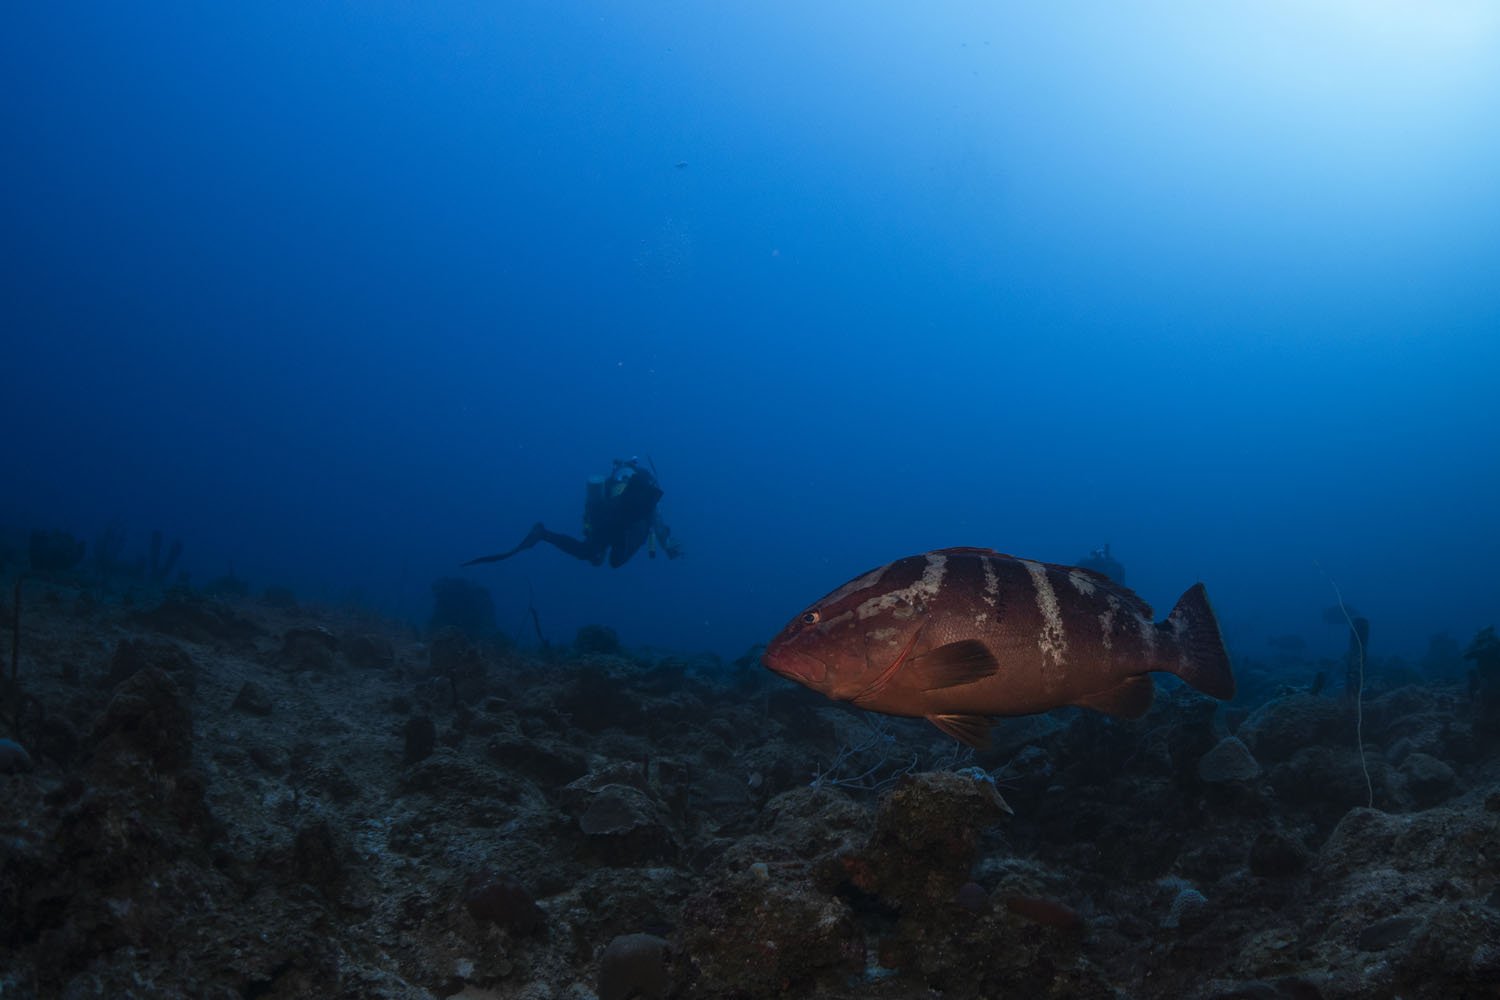  Nassau Grouper have been documented to live up to 29 years old. At about 4-5 years they reach sexual maturity and join a spawning aggregation. 